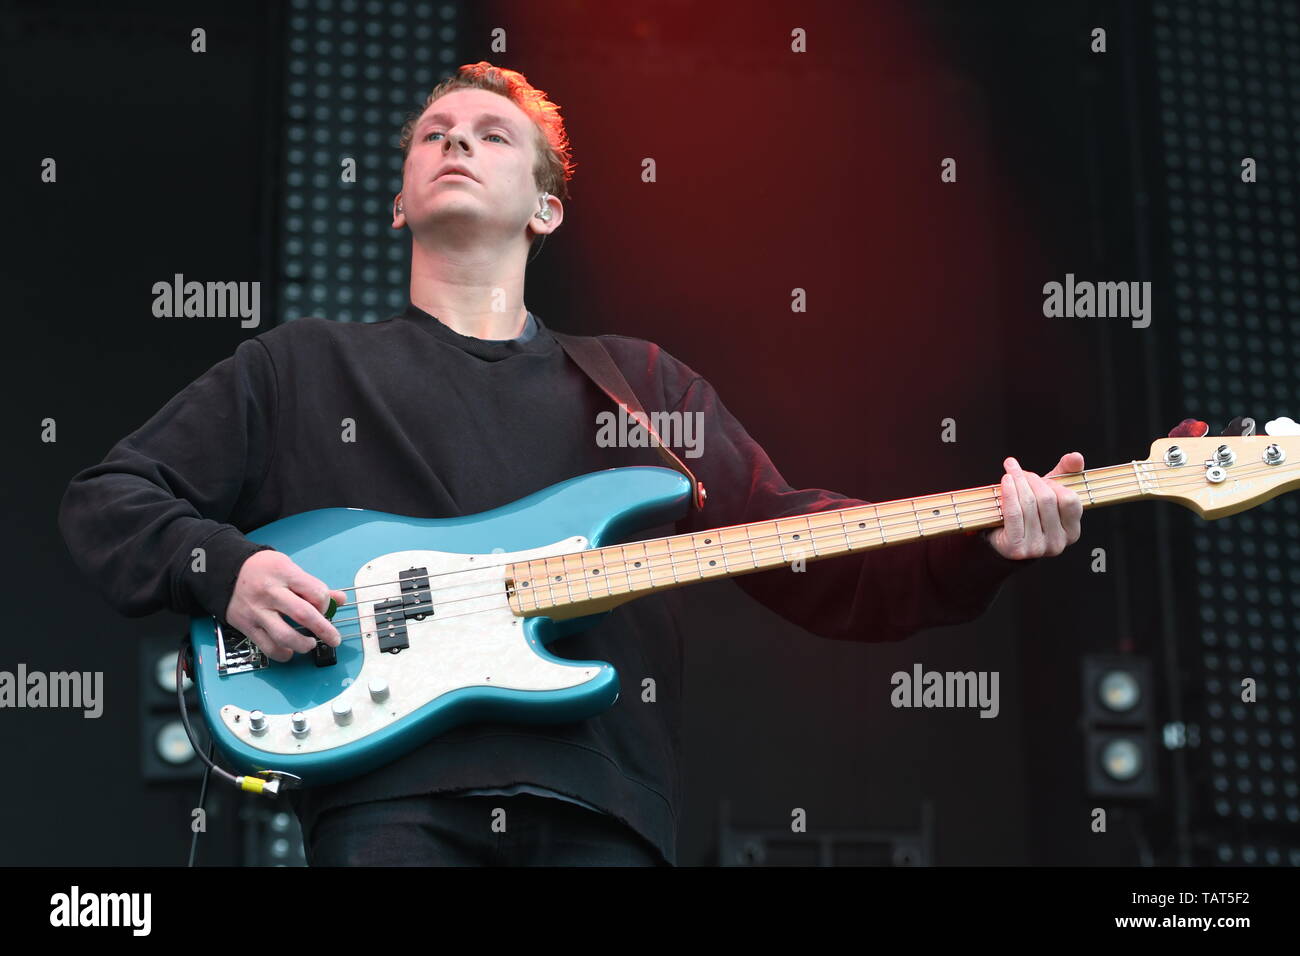 Bass guitarist Charlie Wood is shown performing on stage during a